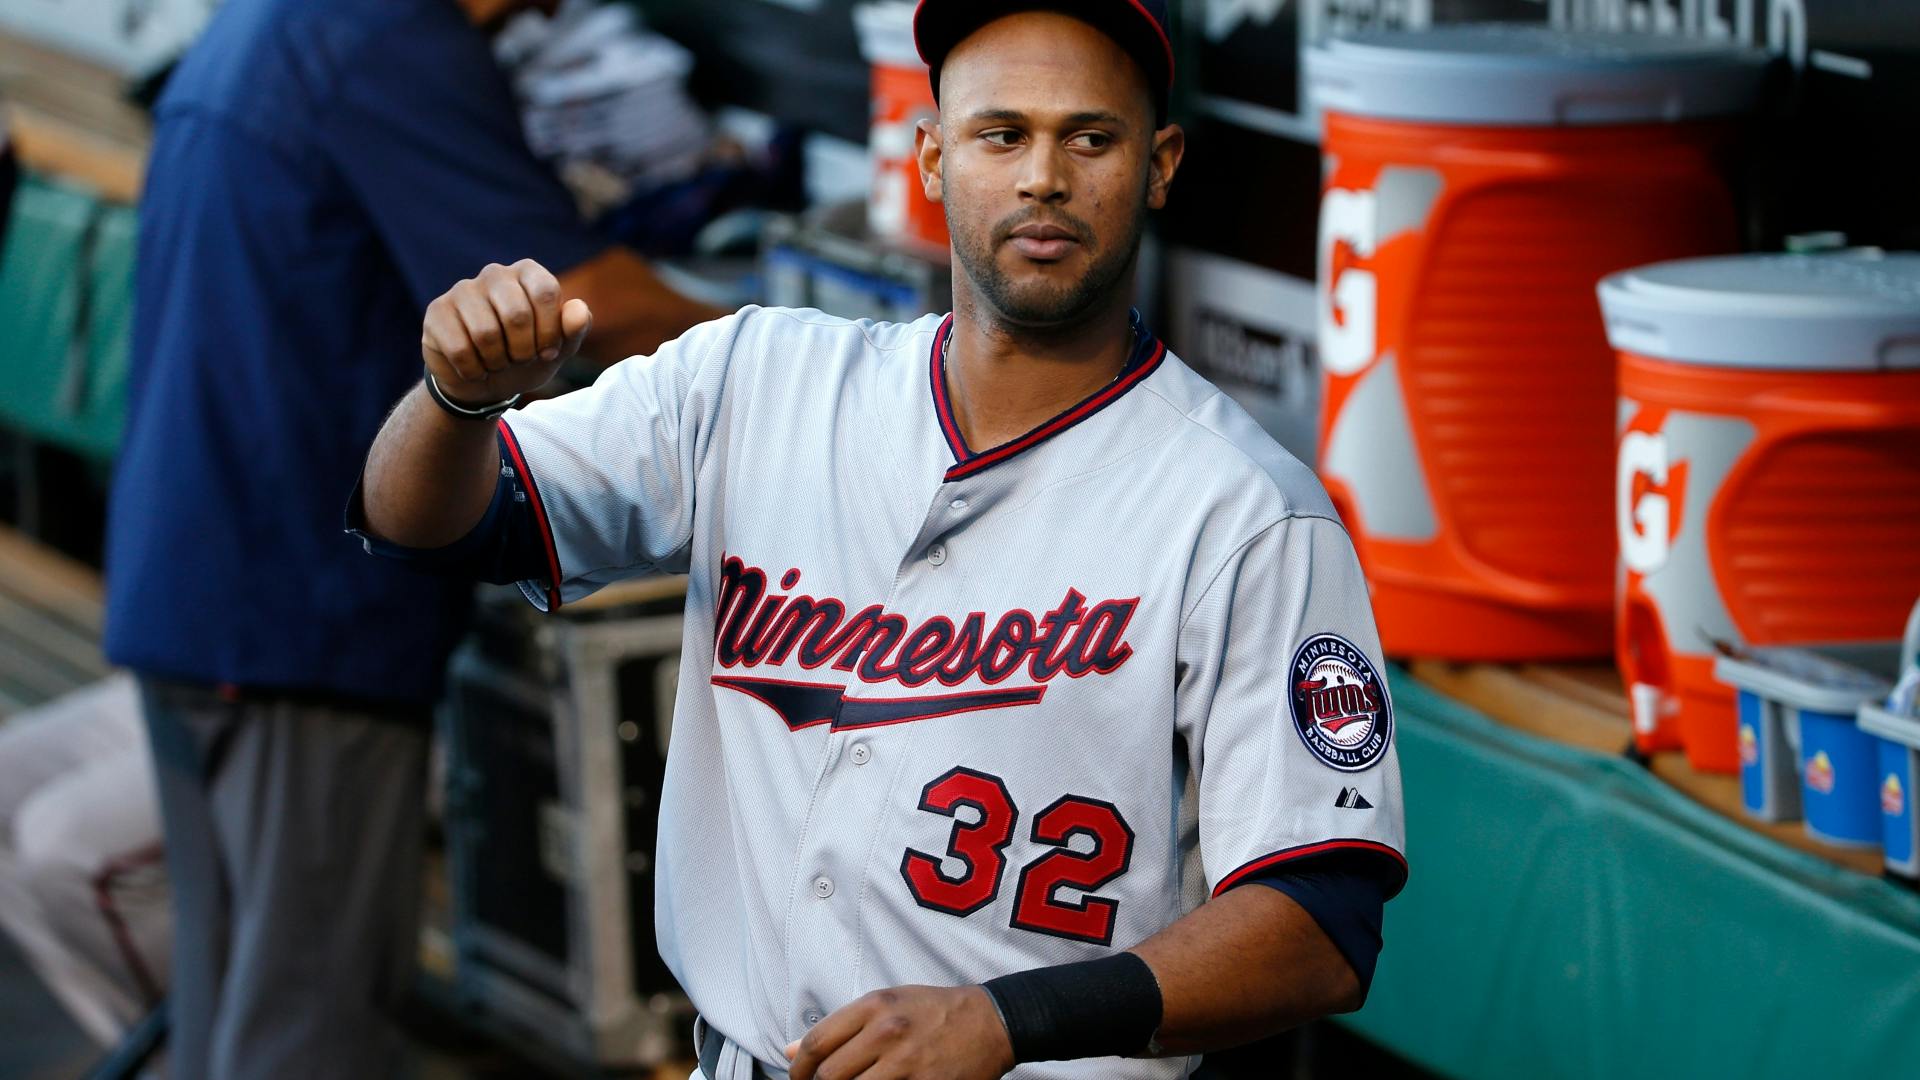 Twins outfielder Aaron Hicks "thought I hit it pretty well," but he was robbed of 8th-inning homer.